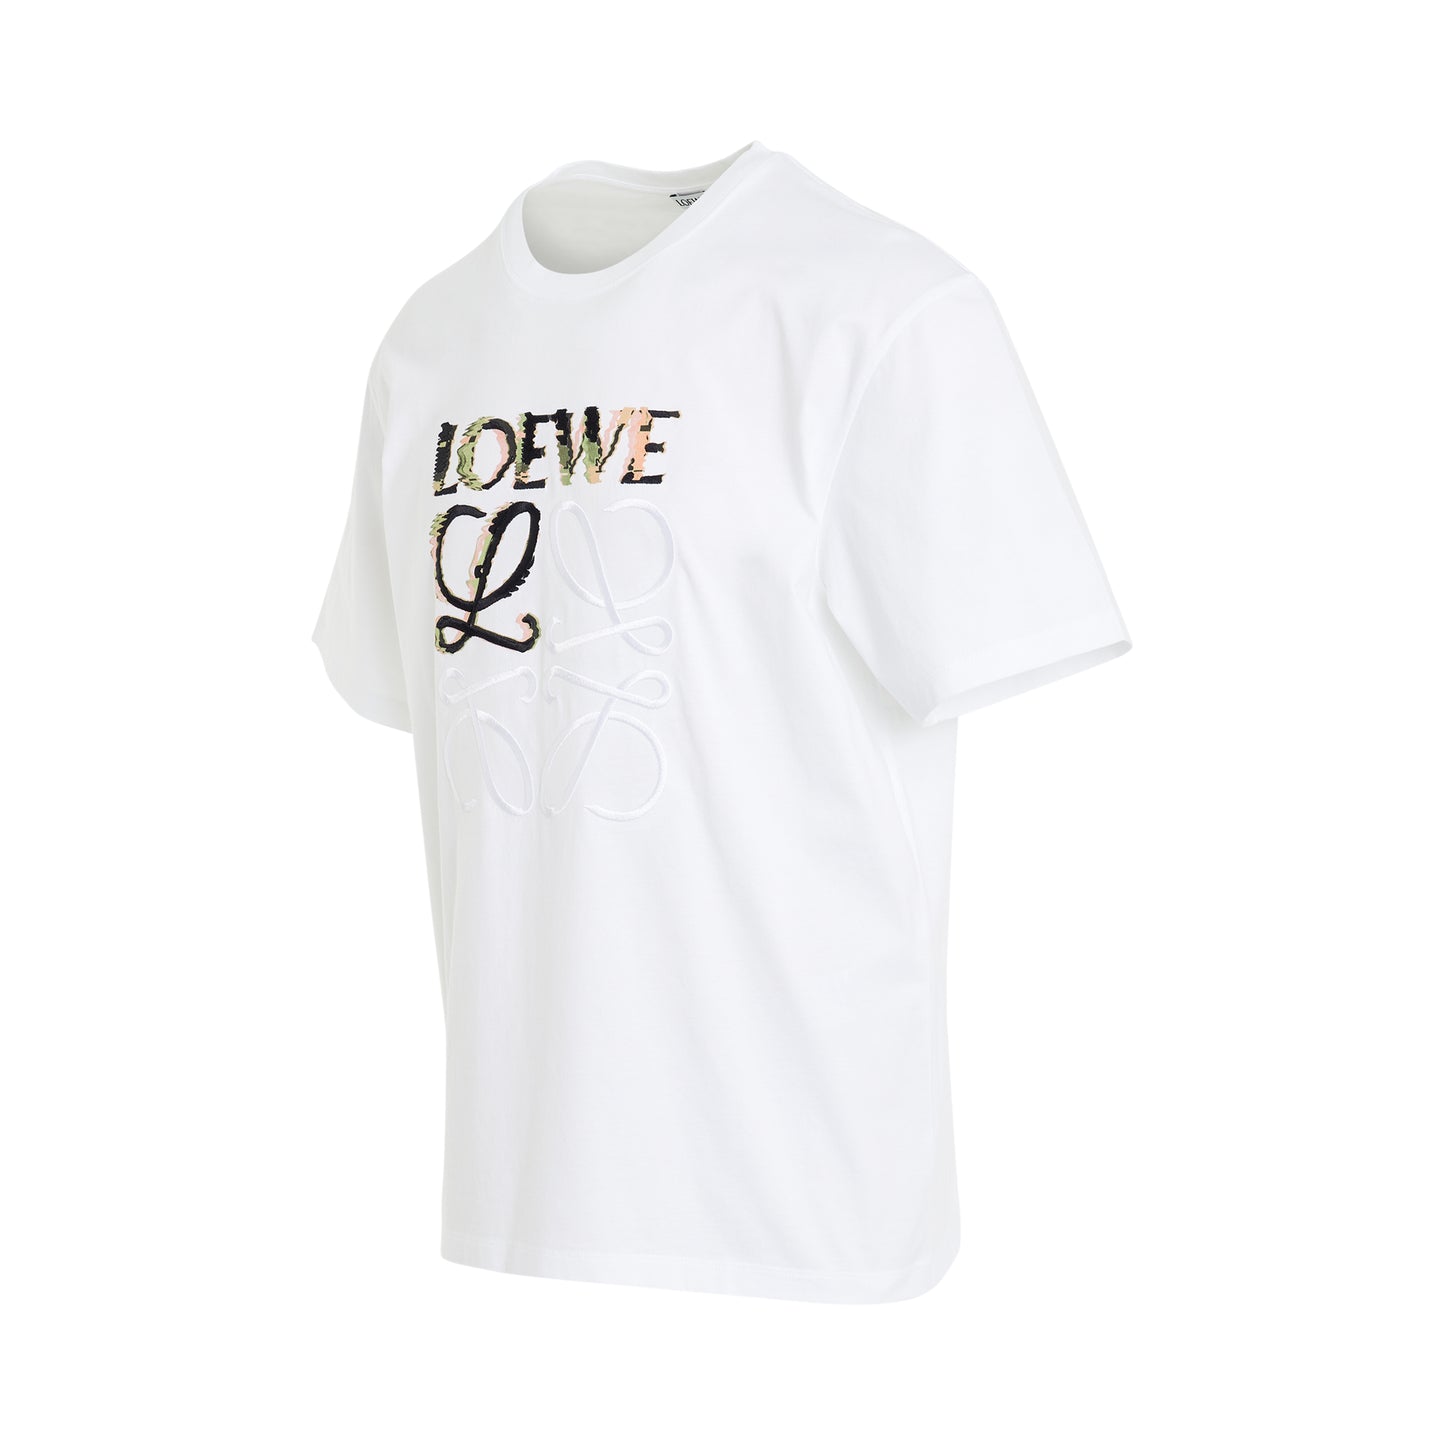 Embroidered Blurred Logo T-Shirt in White/Multicolour